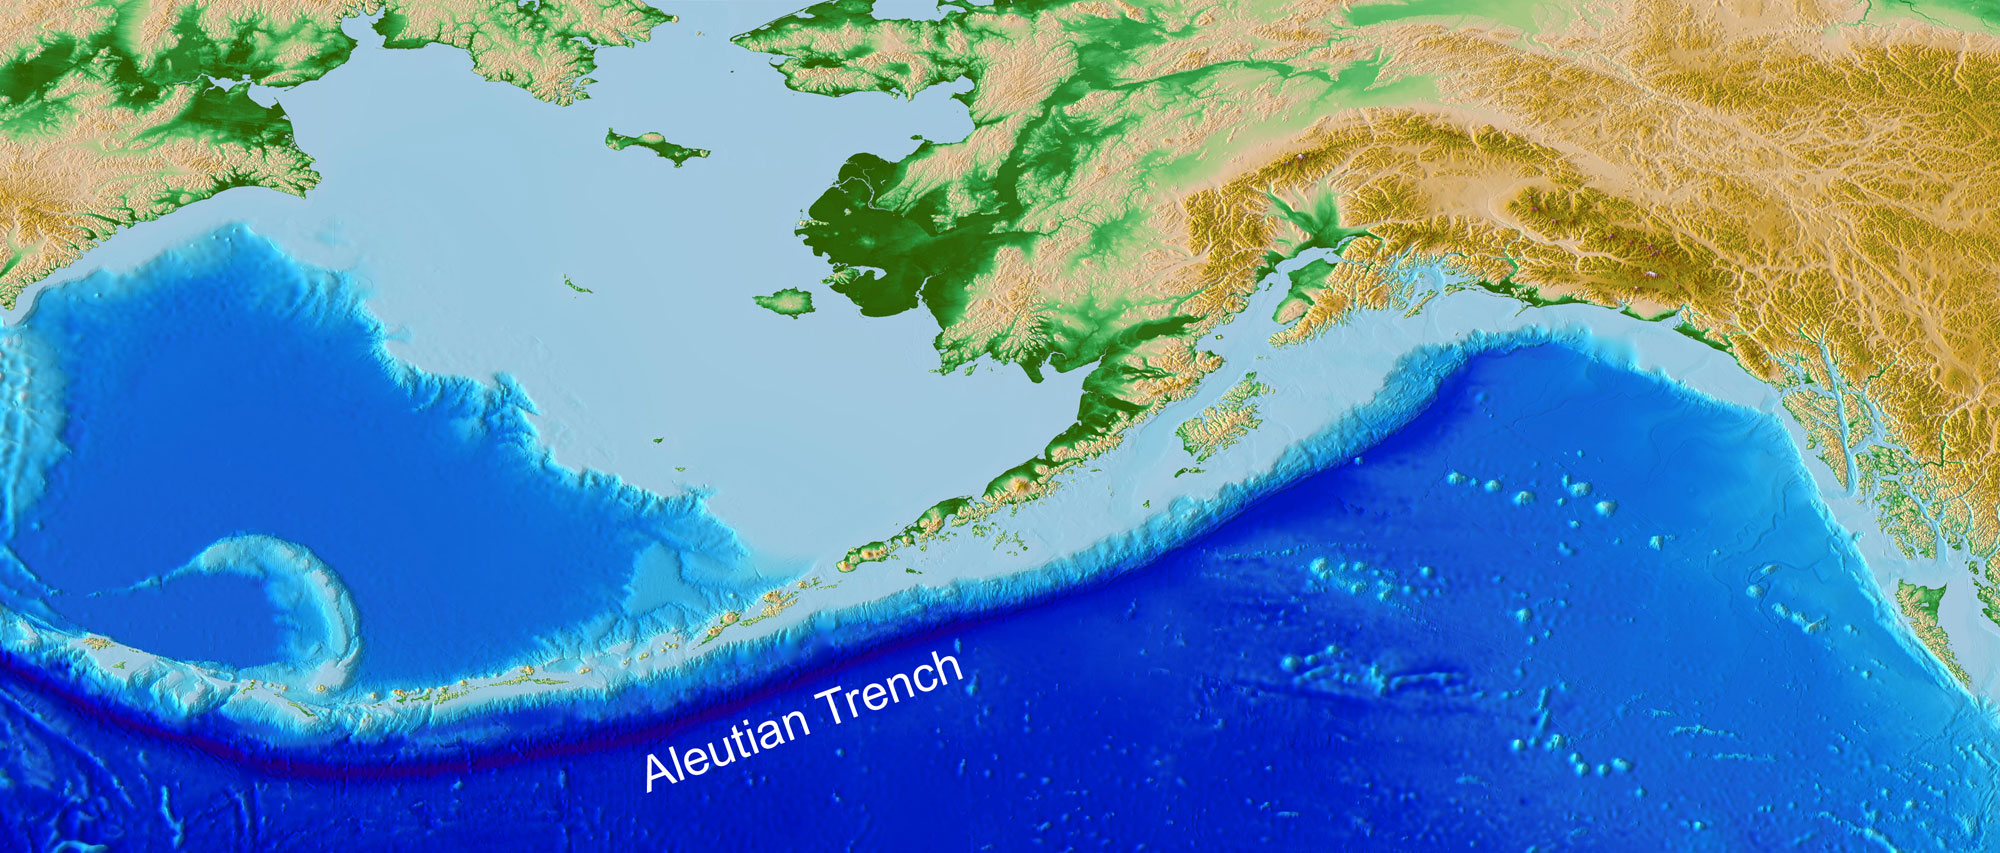 Relief map showing ocean depth around the Aleutian Islands. The Aleutian Trench clearly marks the subduction zone bordering the south side of the island chain.